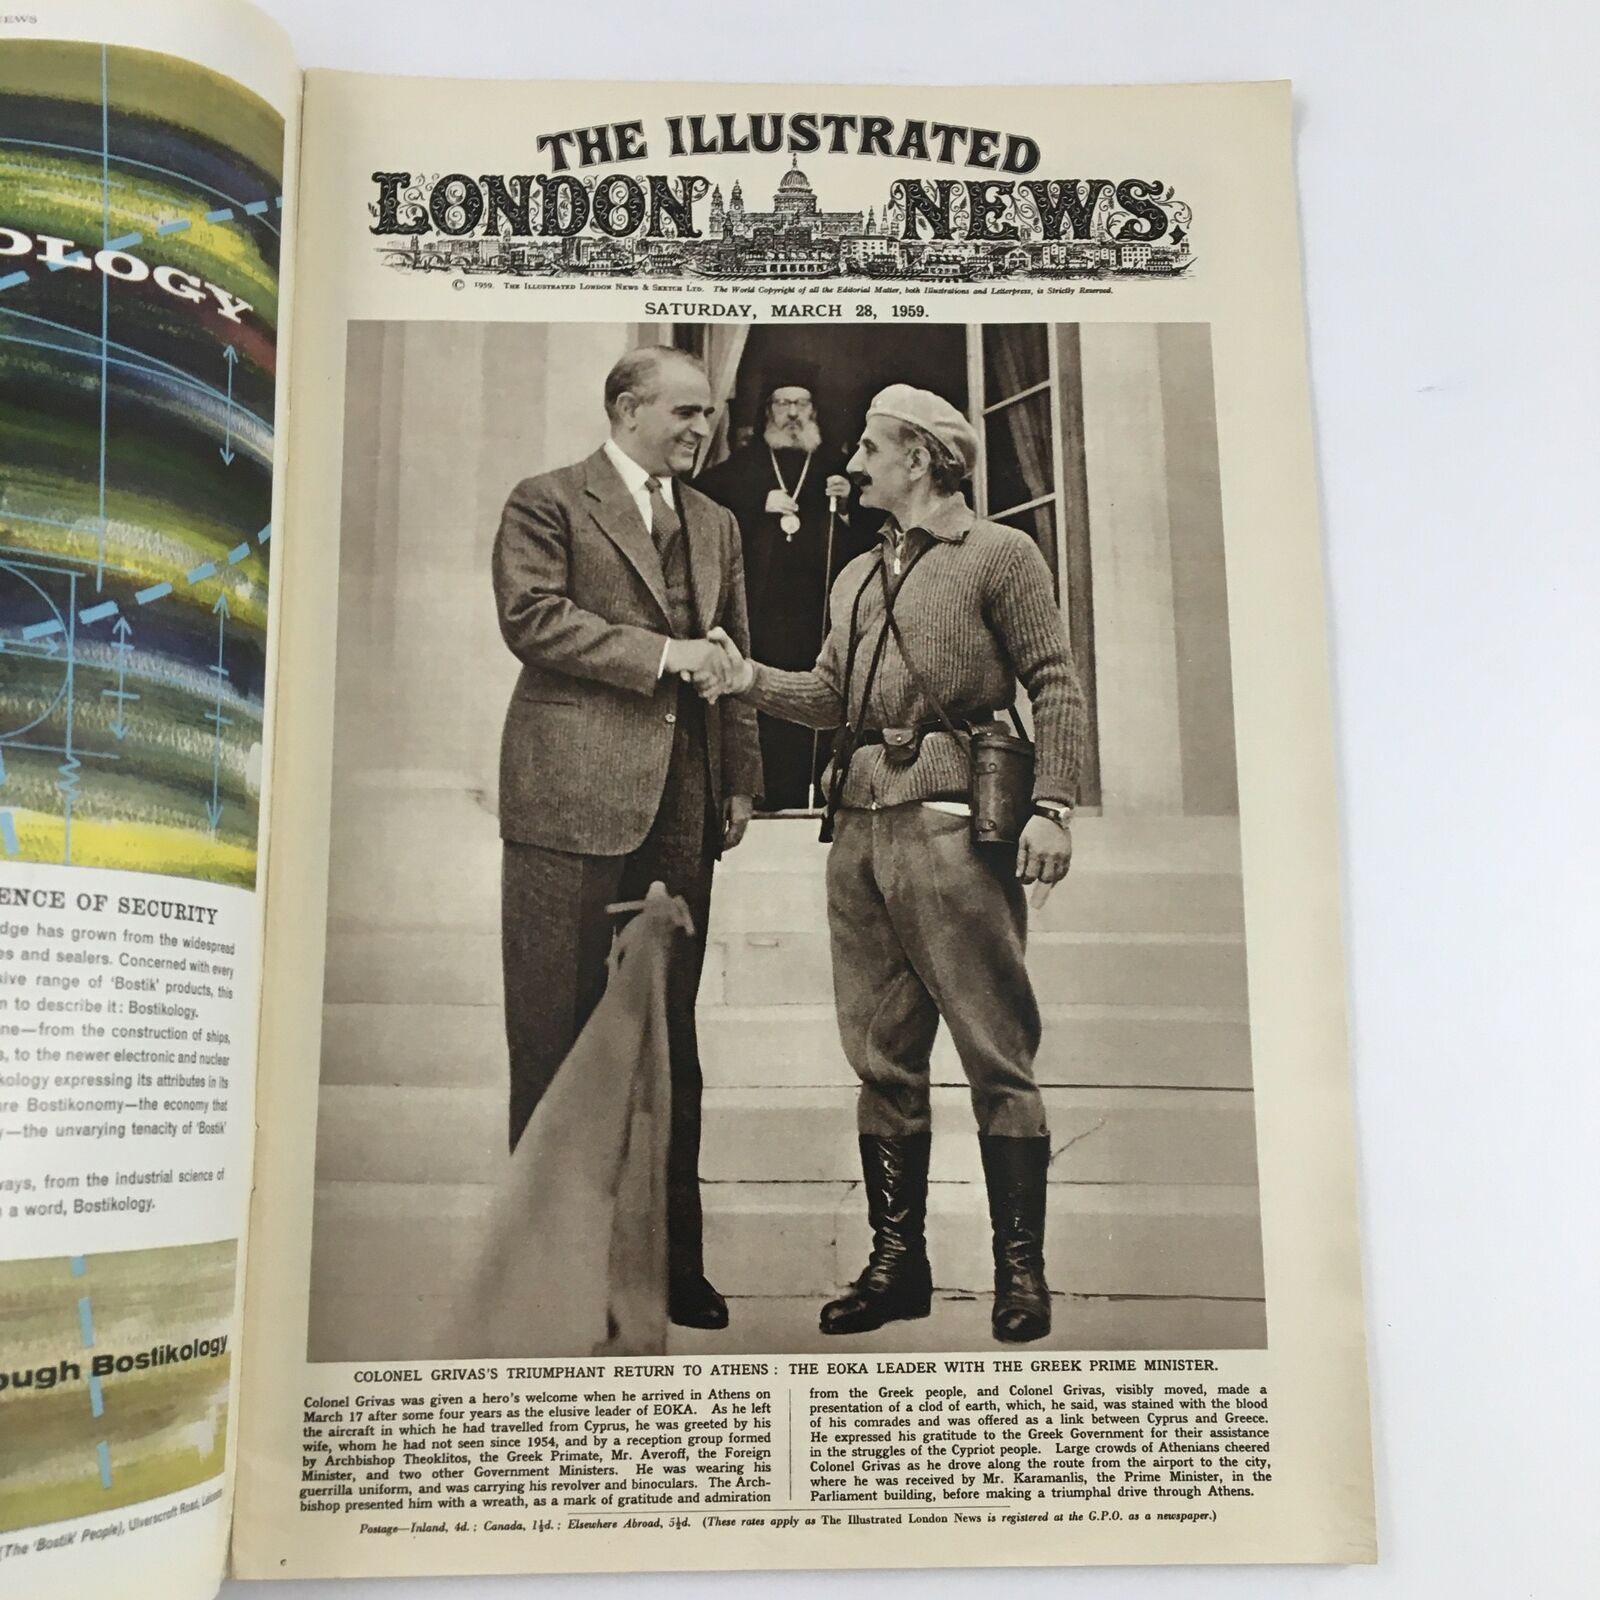 The Illustrated London News March 28 1959 Colonel Griva Return to Athens